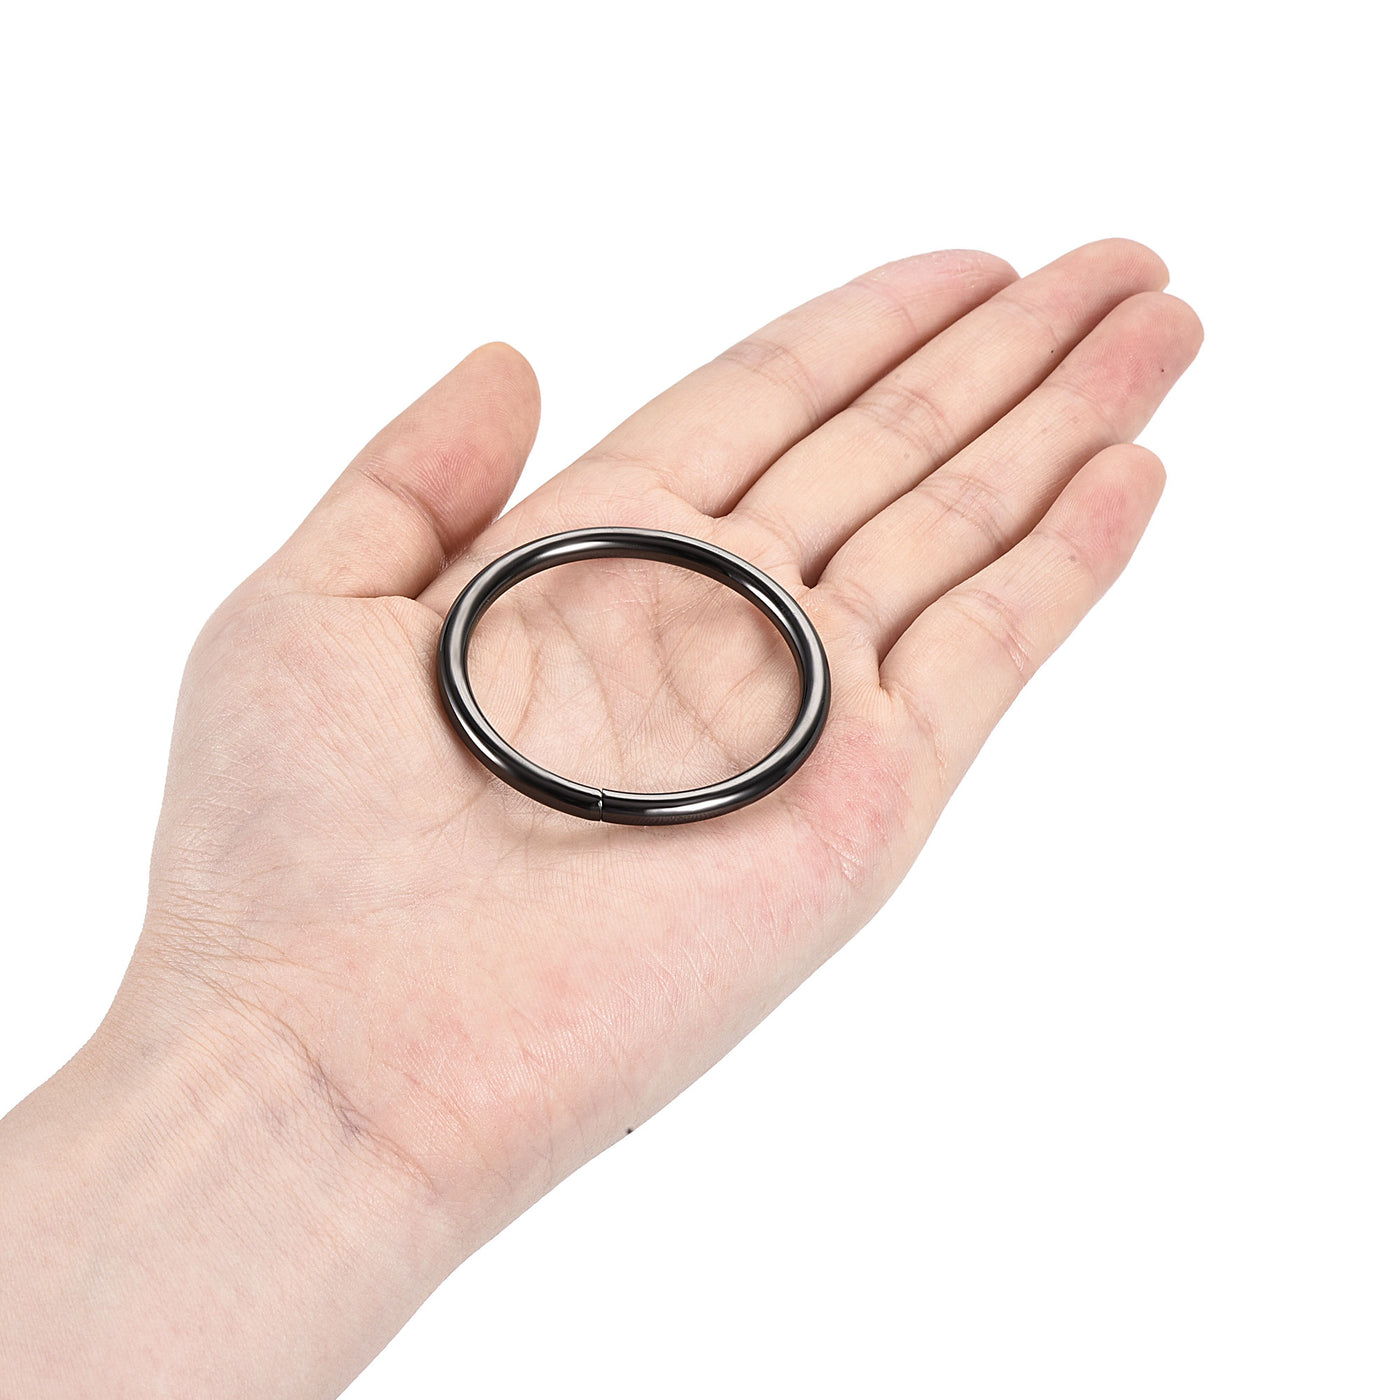 uxcell Uxcell Metal O Ring 38mm(1.5") ID 3.8mm Thickness Non-Welded Rings Black 15pcs